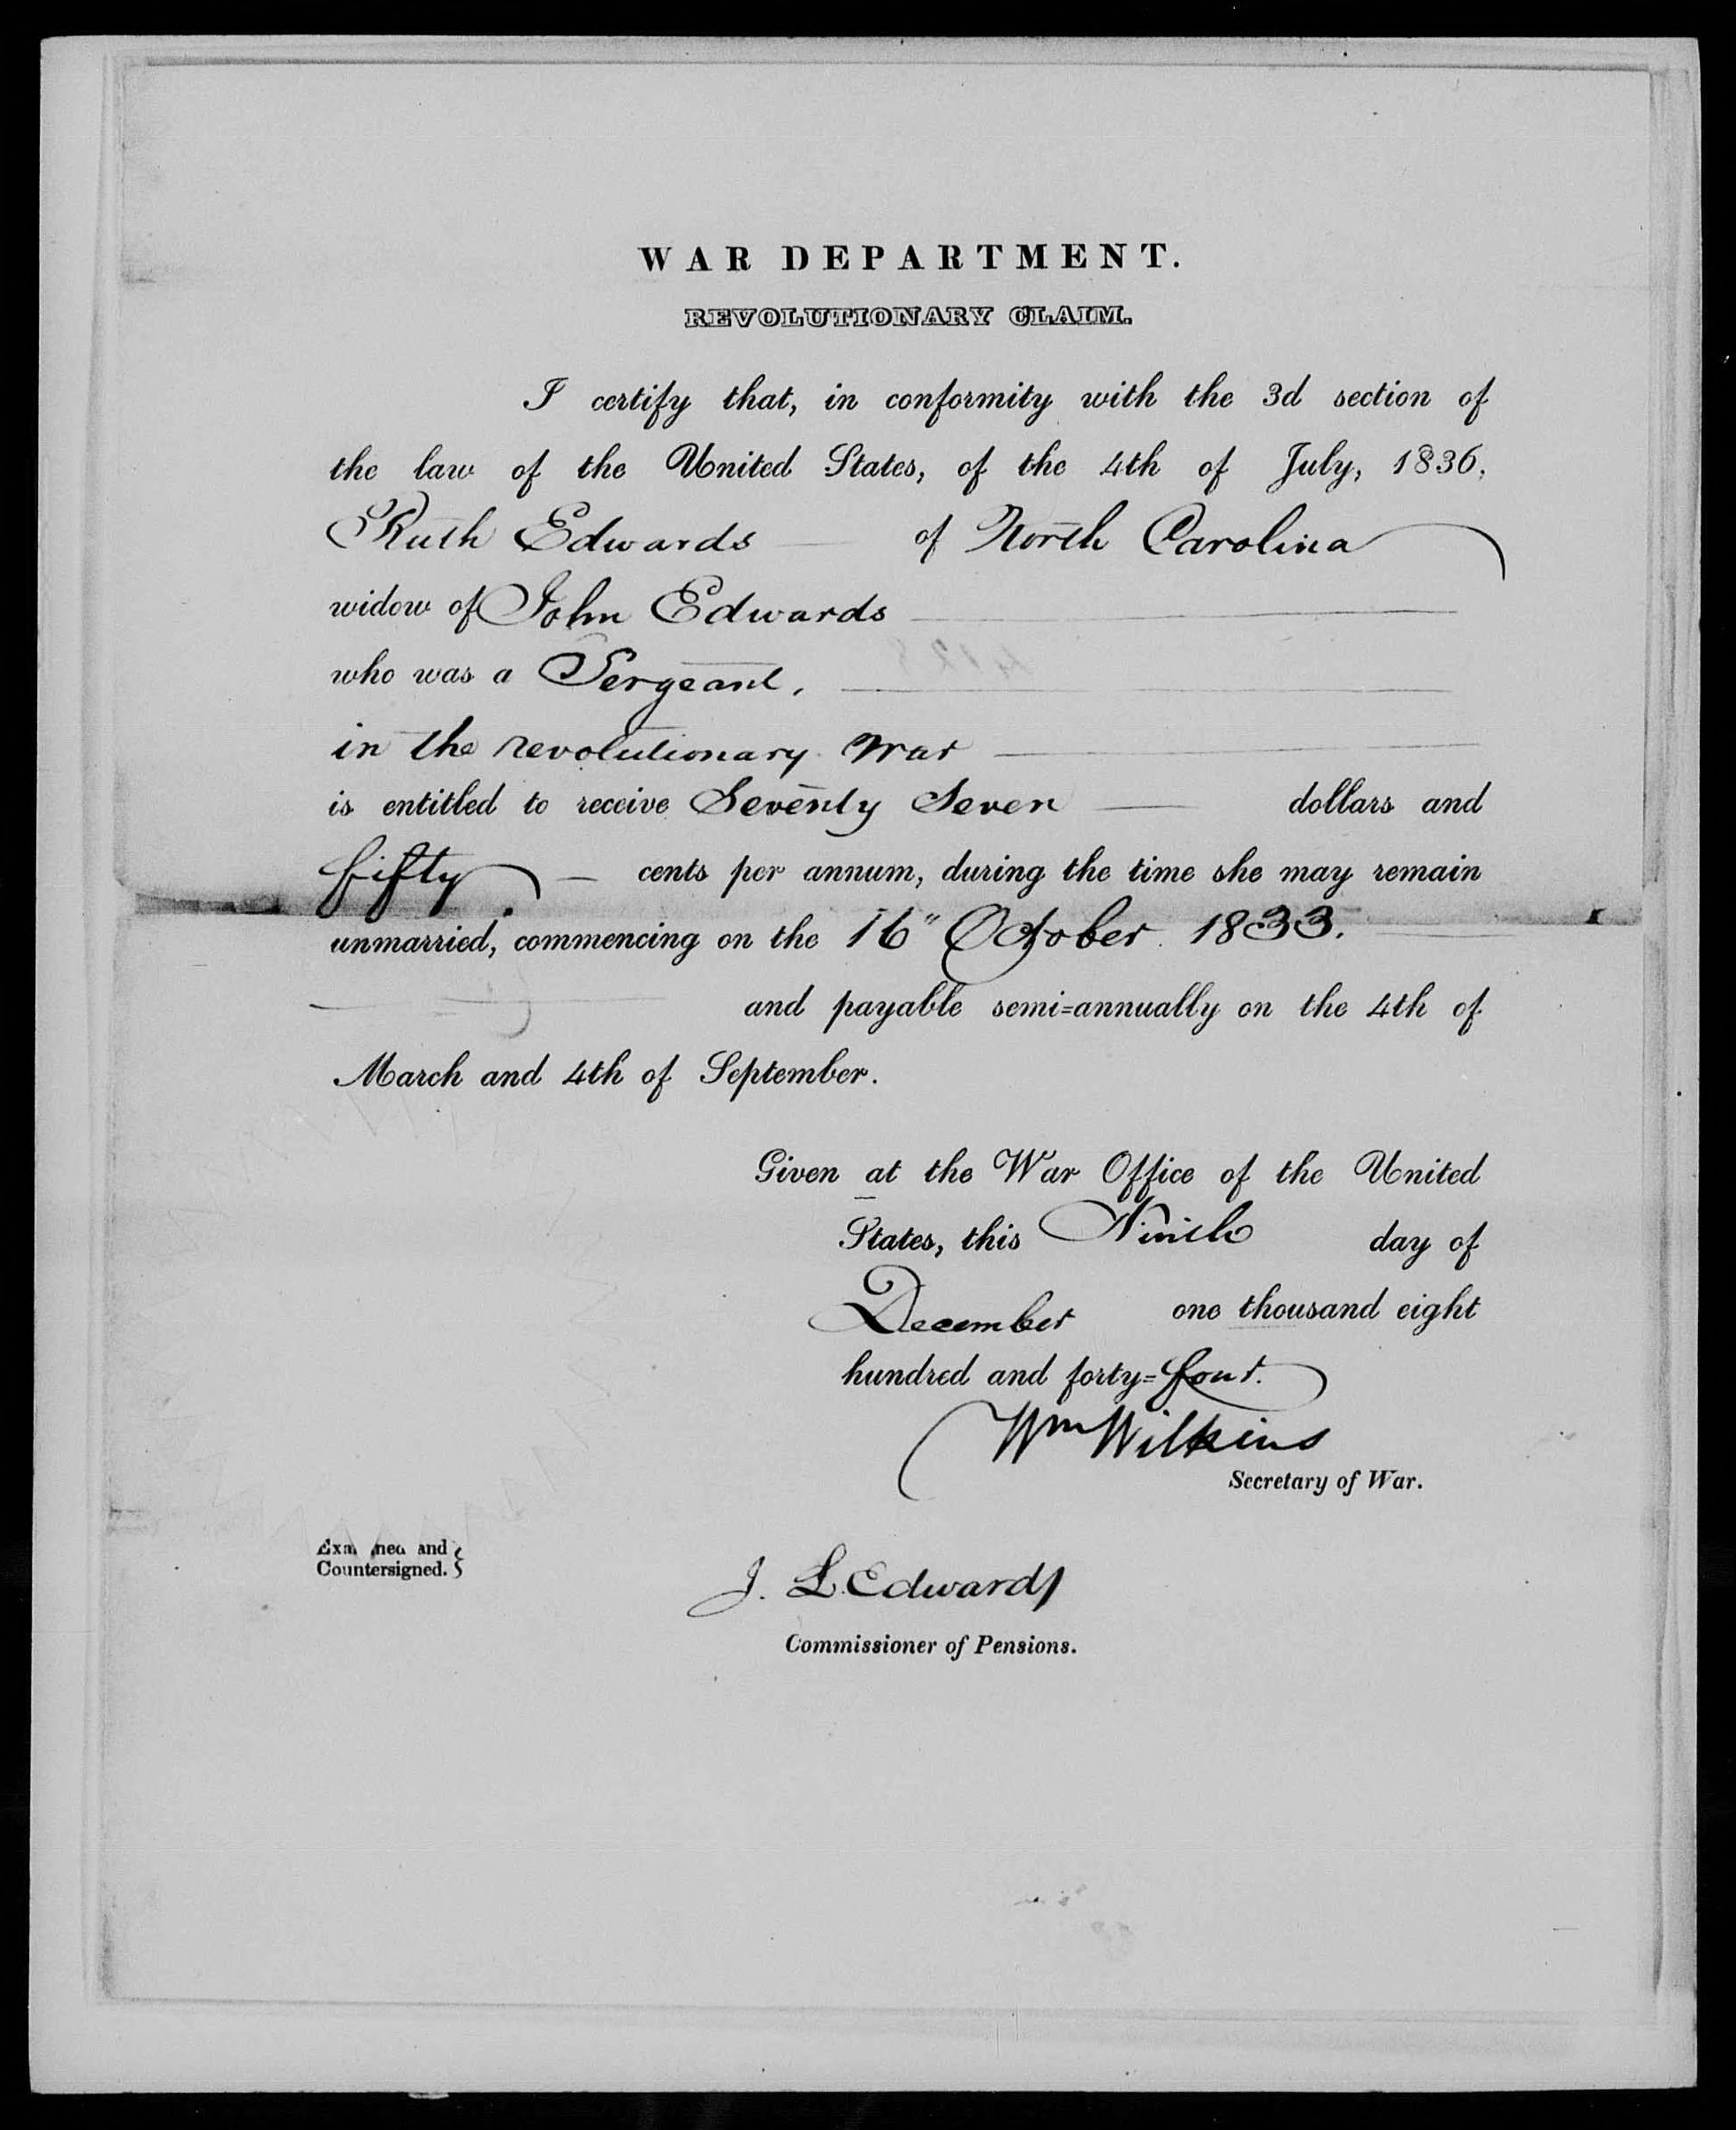 Authorization of Pension Claim from William Wilkins for Ruth Edwards, 9 December 1844, page 1